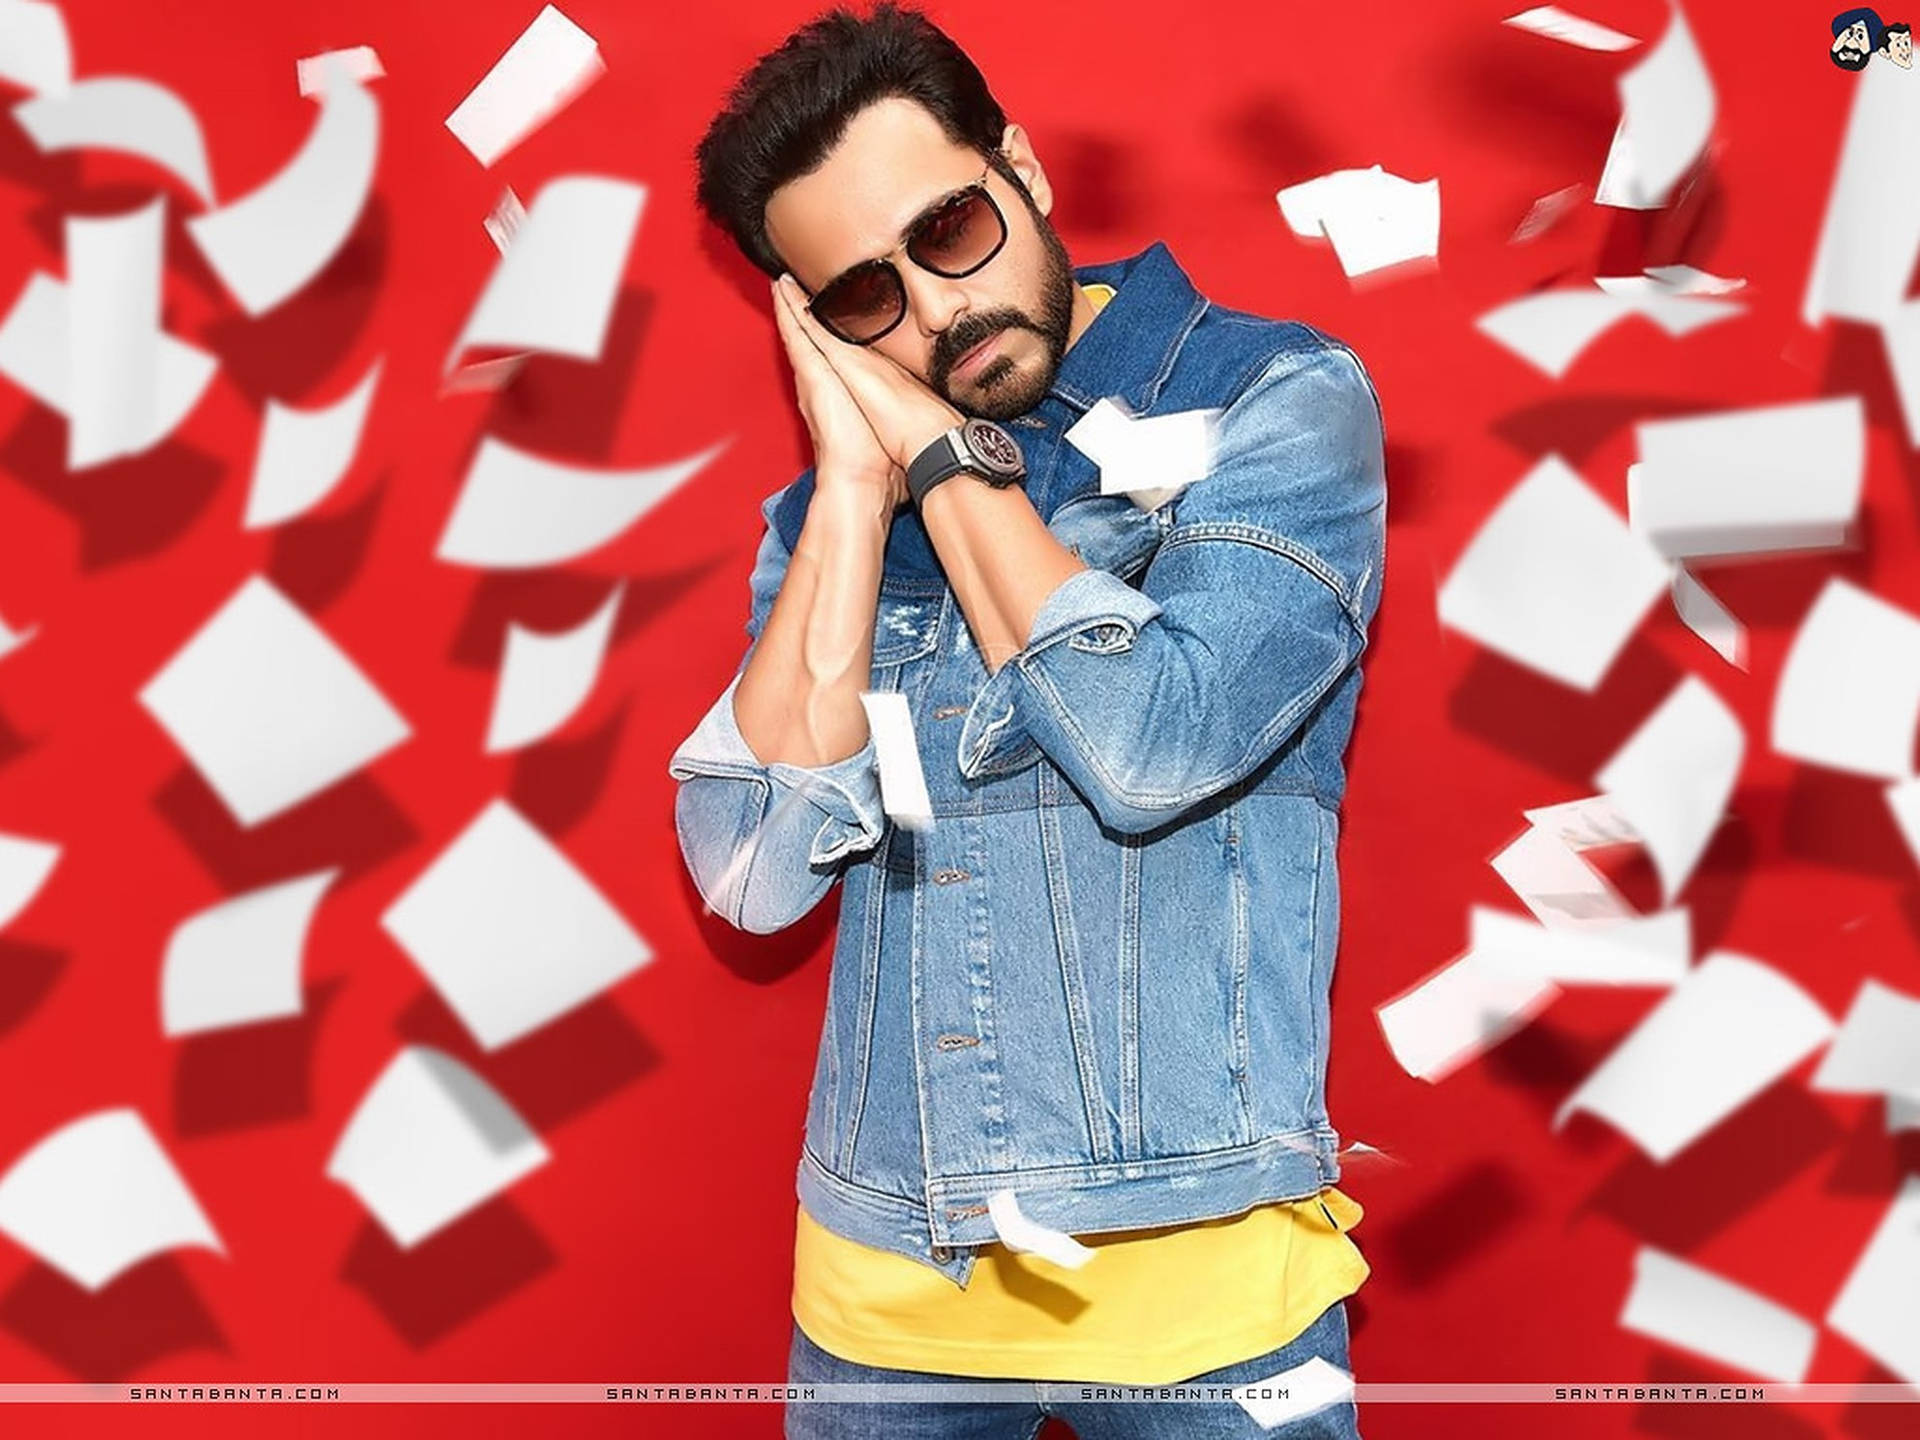 Emraan Hashmi's new lucky rings? | Hindi Movie News - Times of India